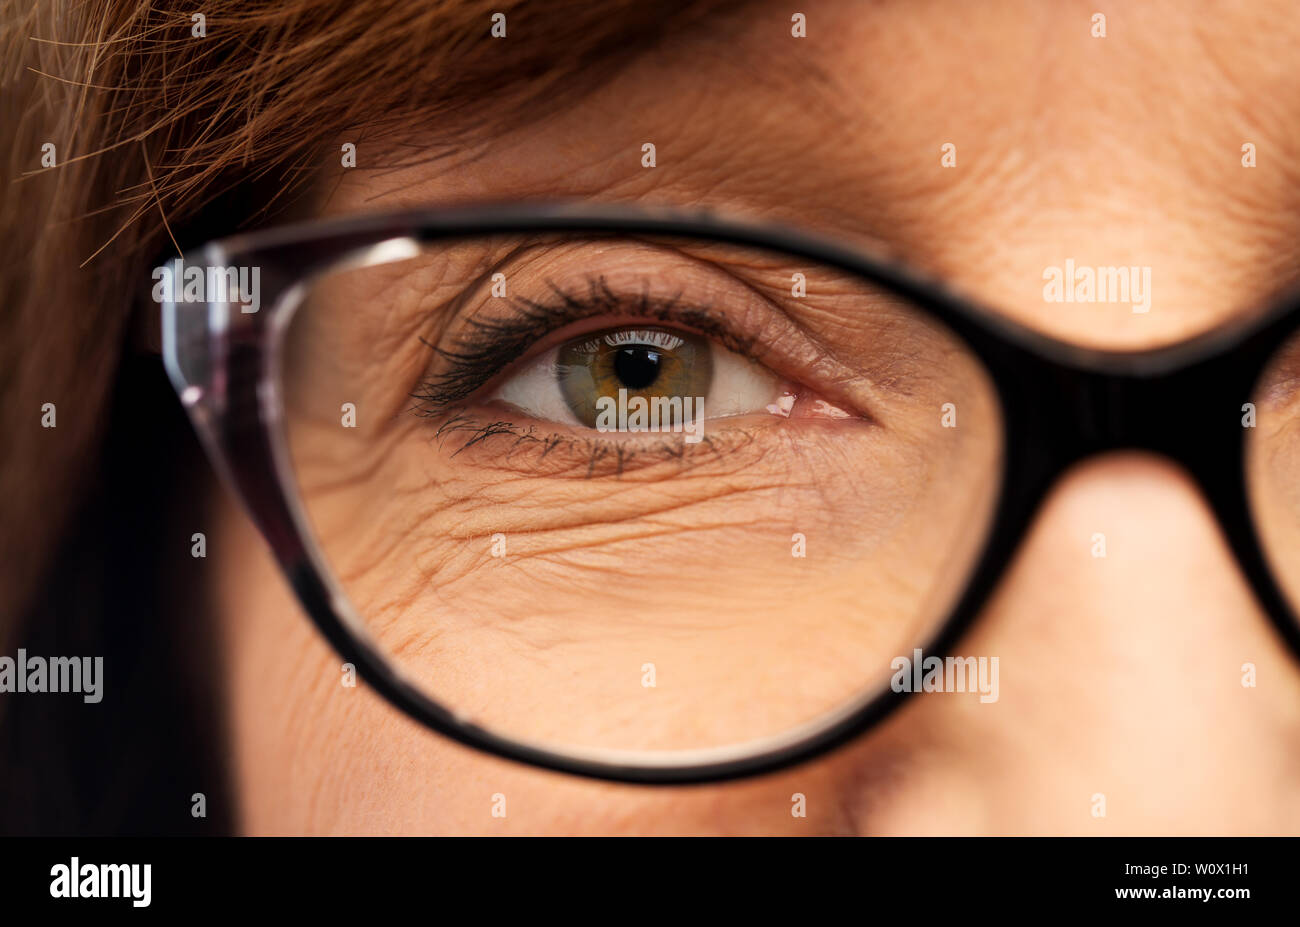 close up of face of senior woman in glasses Stock Photo